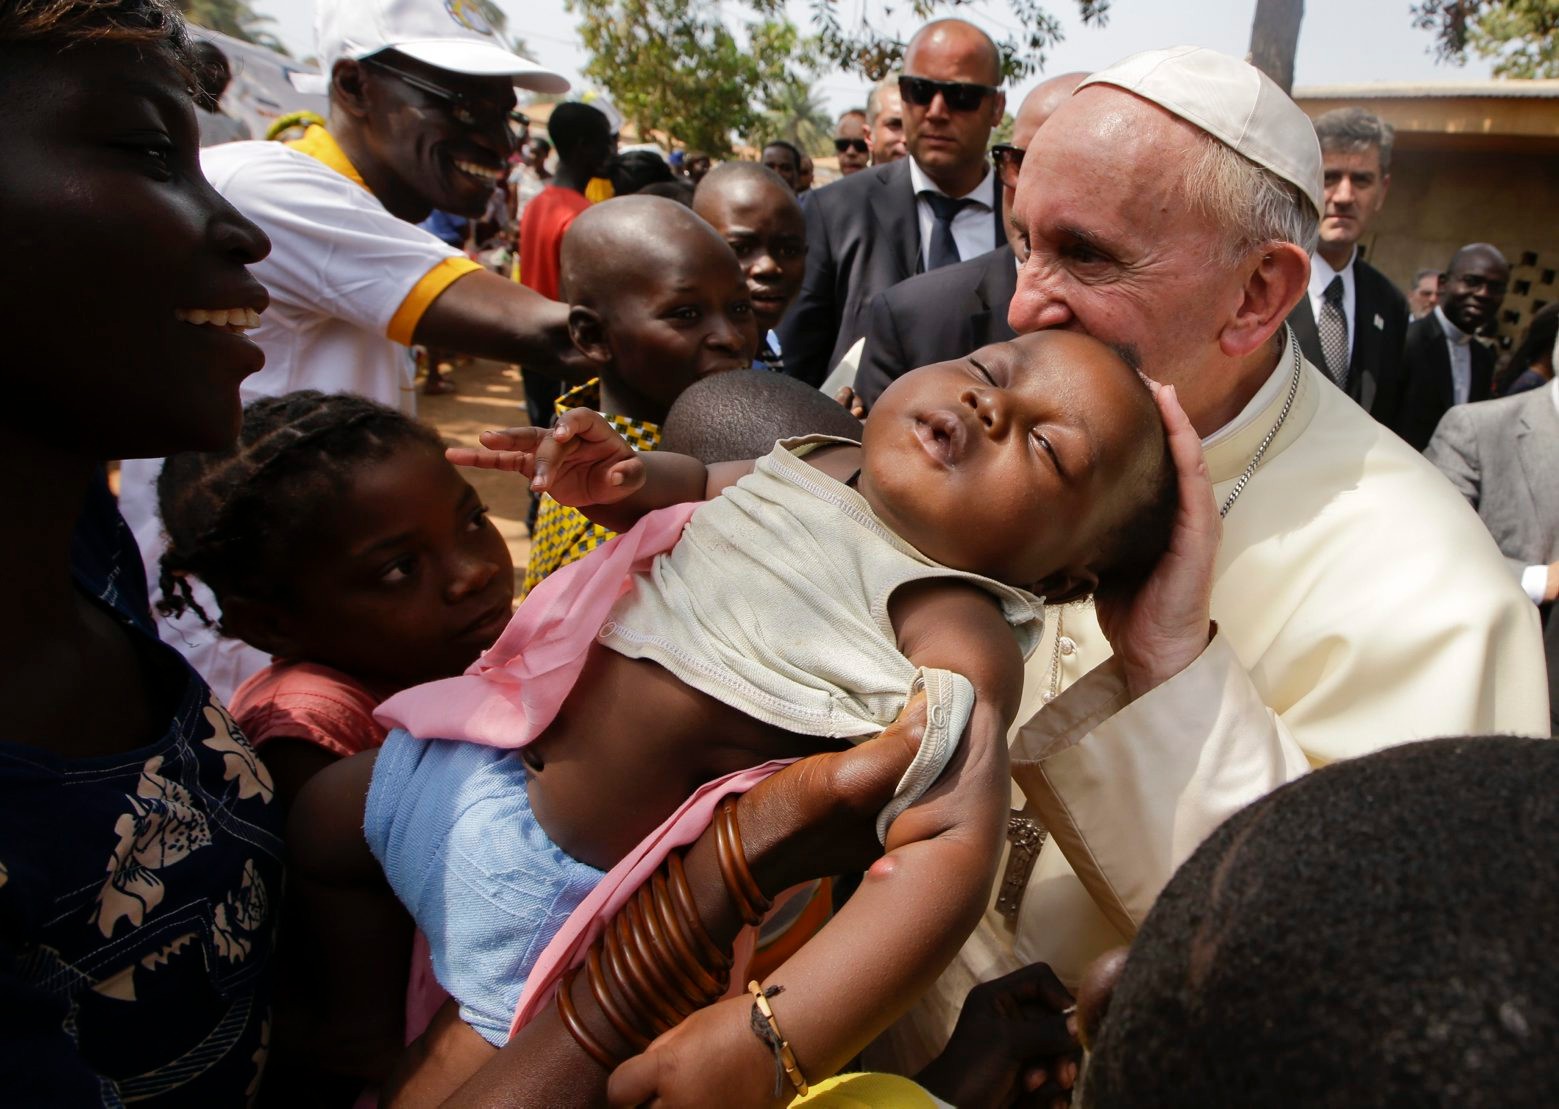 Pope Francis caresses a baby as he visits a refugee camp, in Bangui, Central African Republic, Sunday, Nov. 29, 2015. The Pope has landed in the capital of Central African Republic, his final stop in Africa and where he will seek to heal a country wracked by conflict between Muslims and Christians. (AP Photo/Andrew Medichini) Africa Pope Central African Republic